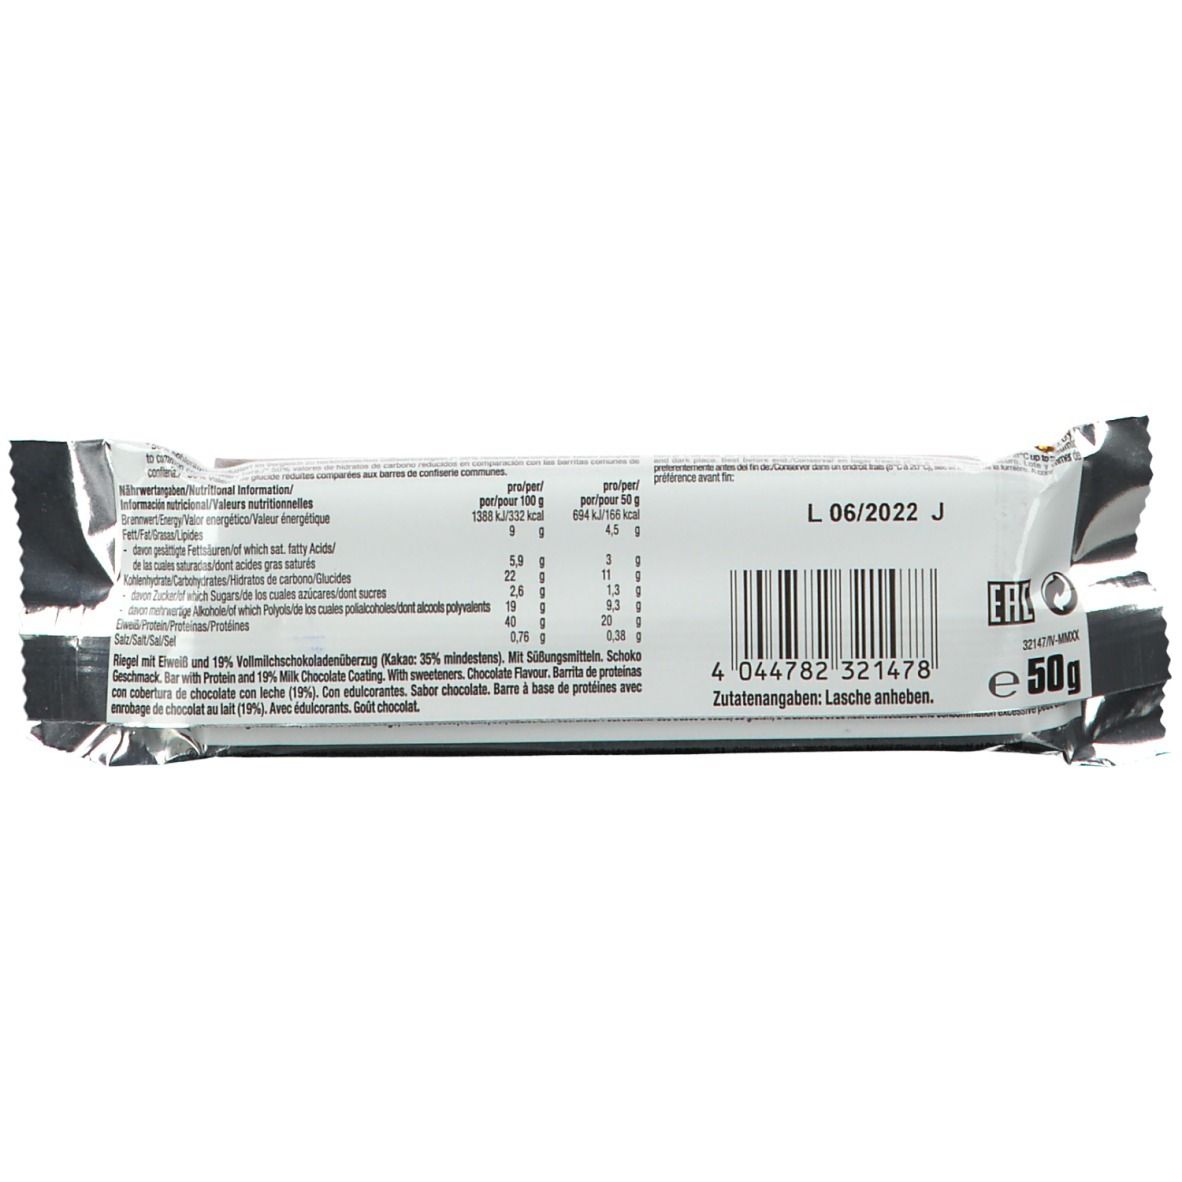 WEIDER® LOW CARB HIGH PROTEIN BAR CHOCOLATE